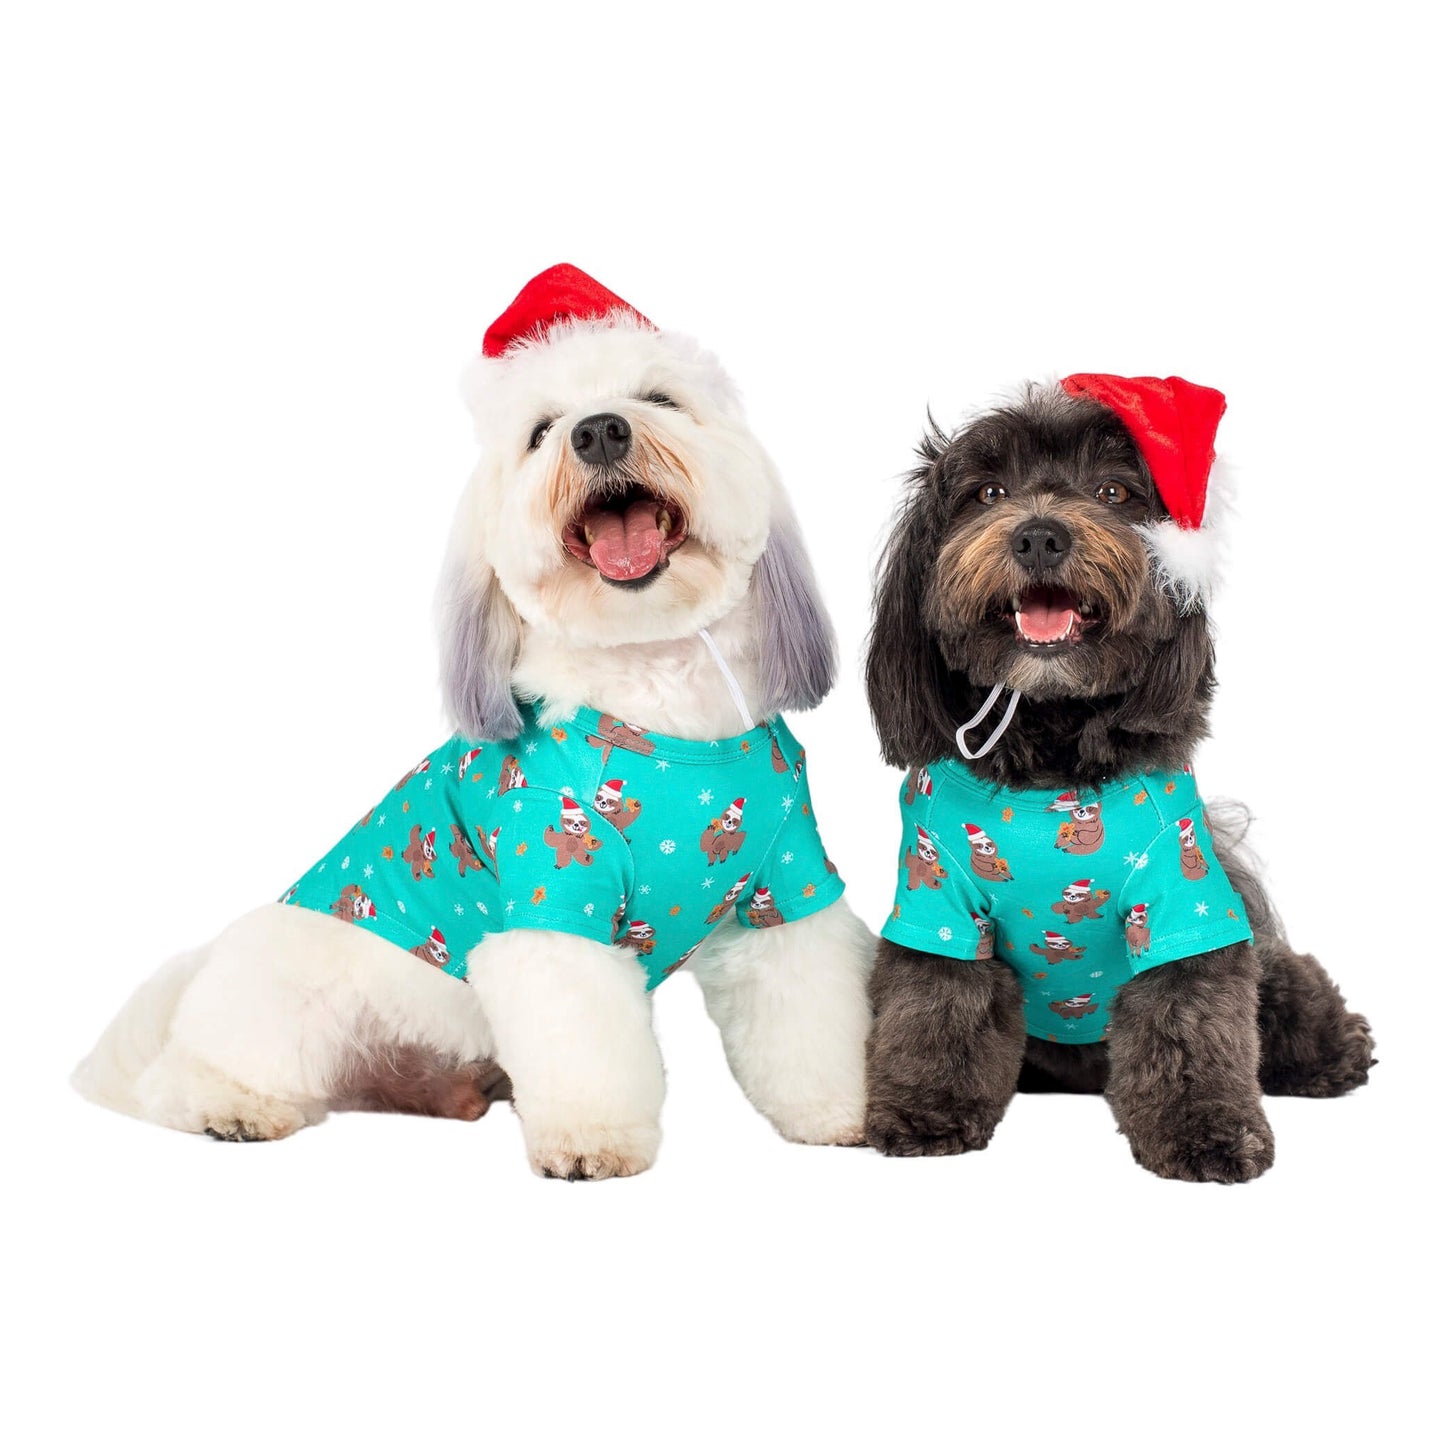 Cute Havanese Dogs in Festive Sloths Dog Shirts - Pair of Adorable Havanese Dogs Wearing Green Christmas Shirts with Sloths in Santa Hats - Double the Holiday Cheer with Matching Dog Clothing - Shop Now for Dog Shirts and Dog Clothing for Your Beloved Havanese Companions.